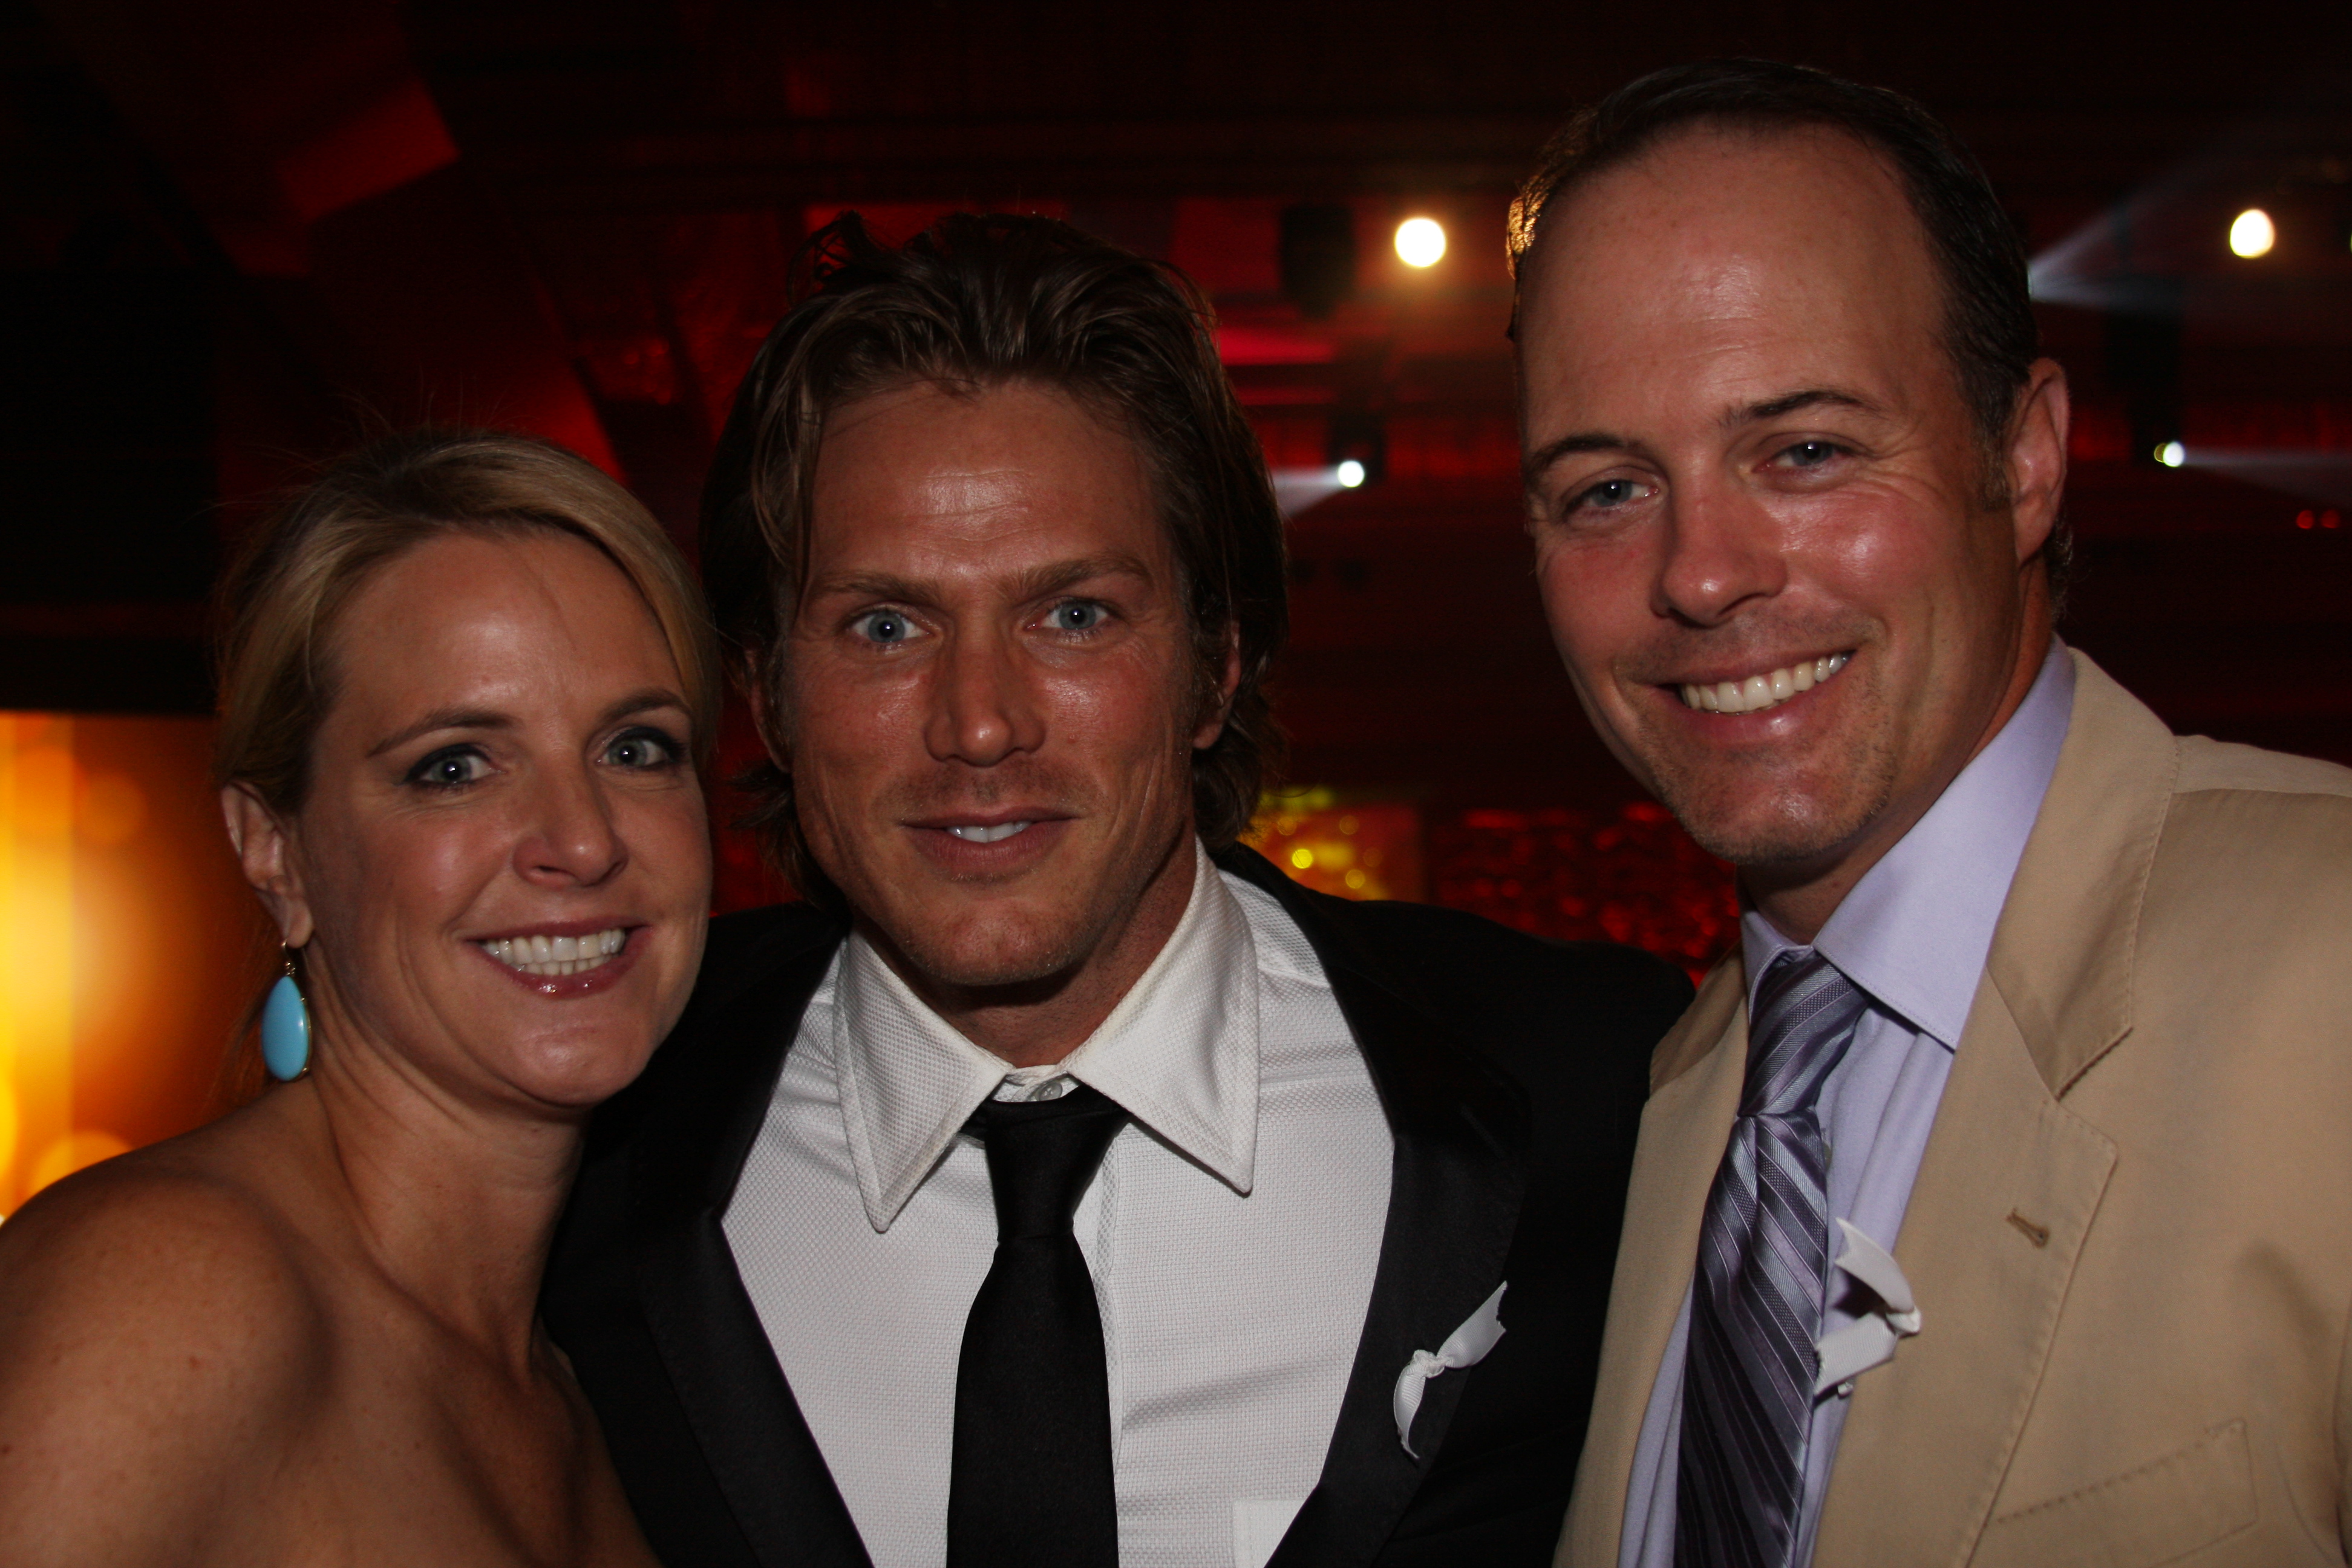 Geoff Callan with his wife Hilary Newsom Callan and actor Jason Lewis at the 20th Annual GLAAD Media Awards. Geoff and fellow director Mike Shaw were awarded the Local Hero Award for their film Pursuit of Equality.